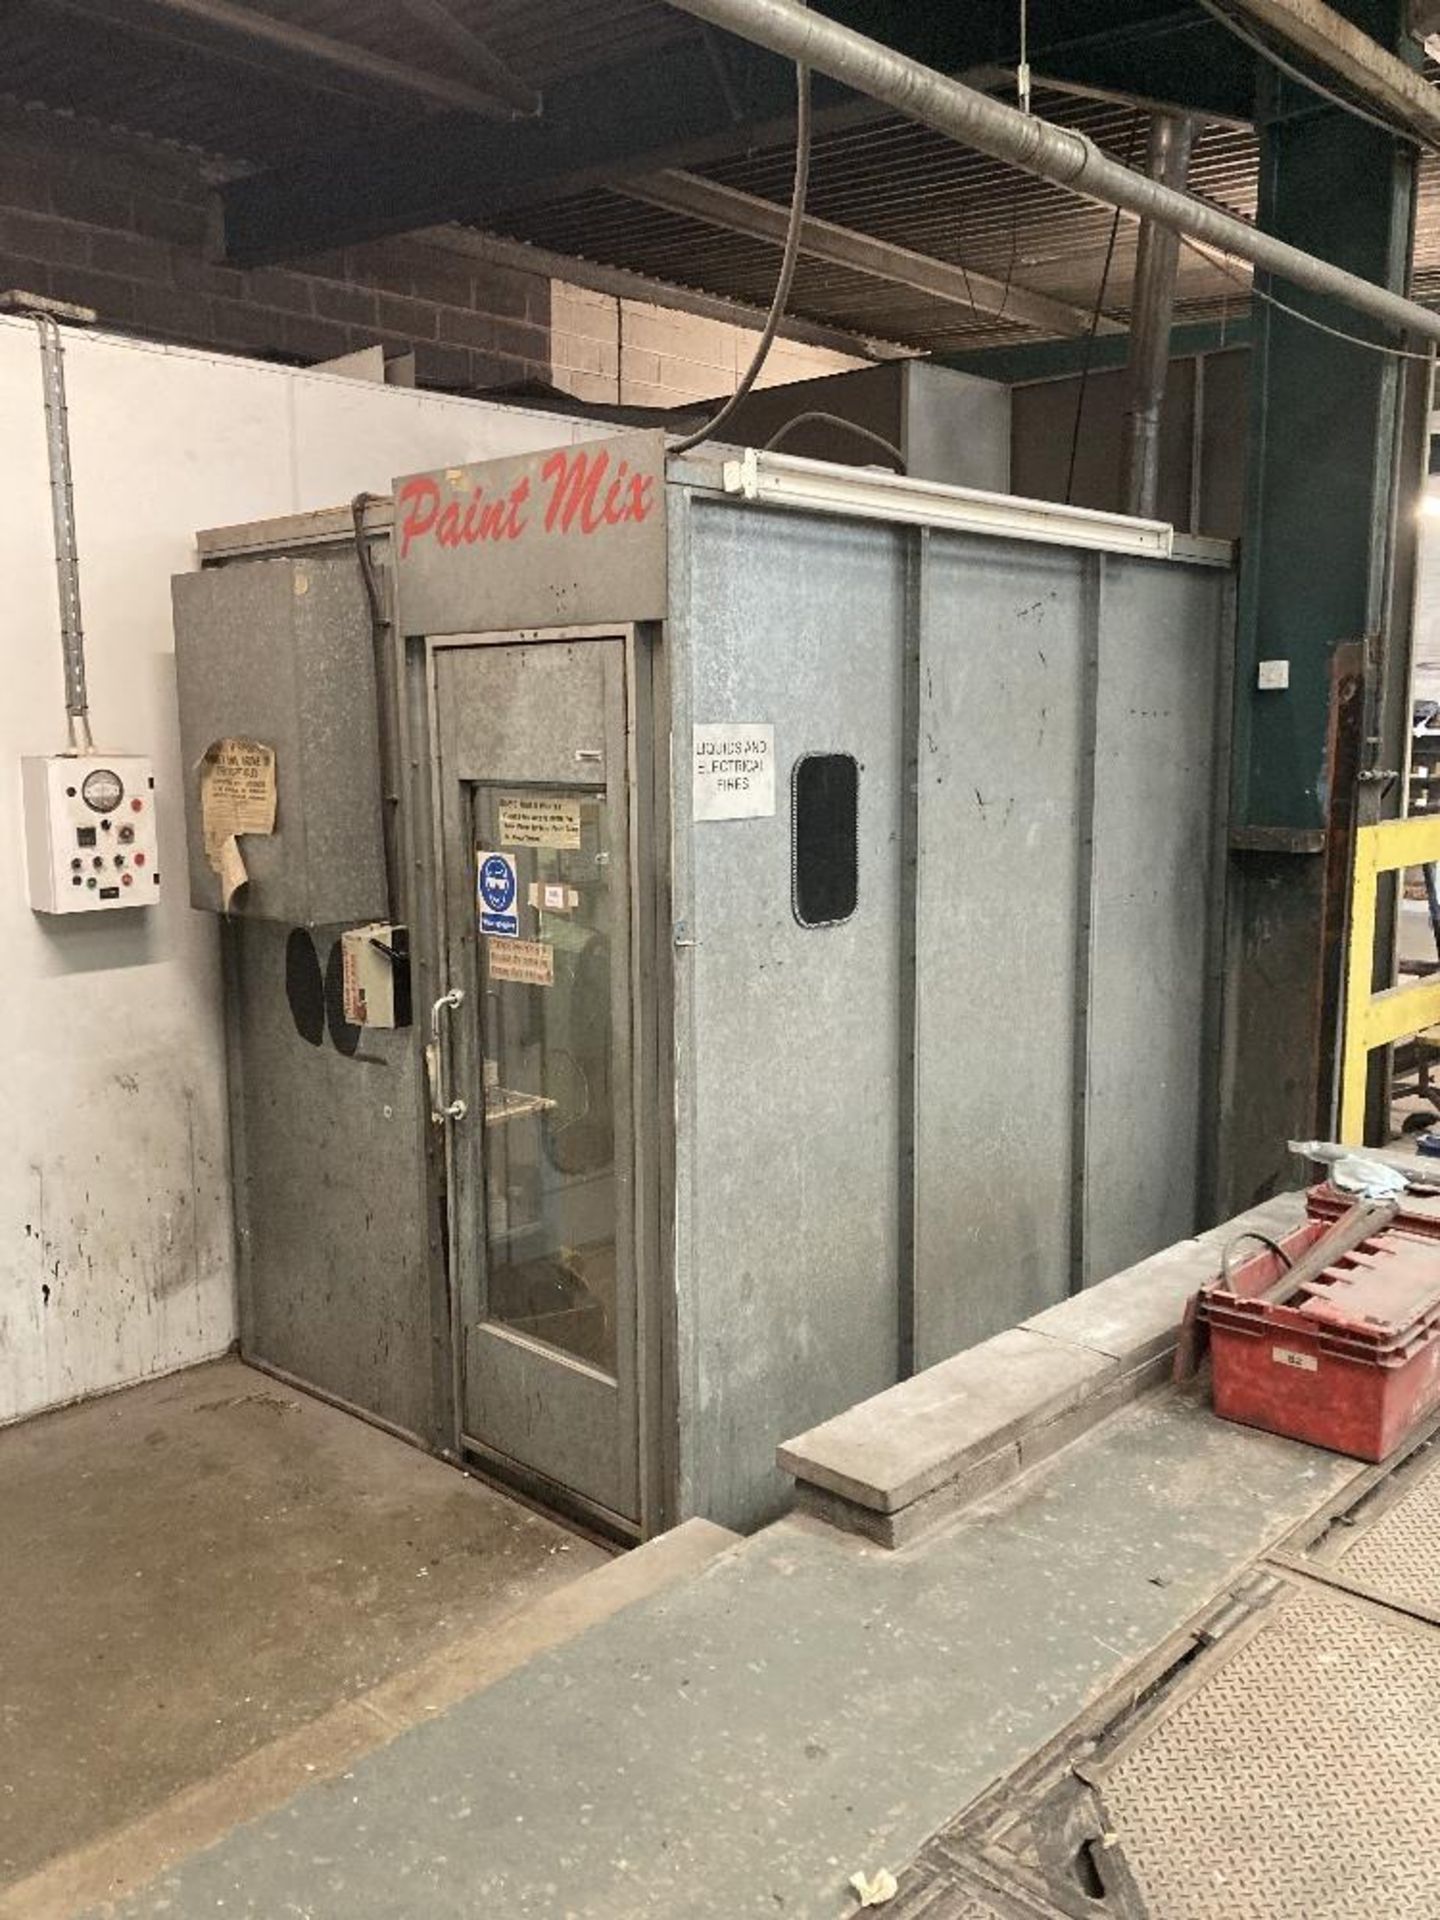 Galvanised steel freestanding paint mixing booth - Image 2 of 4